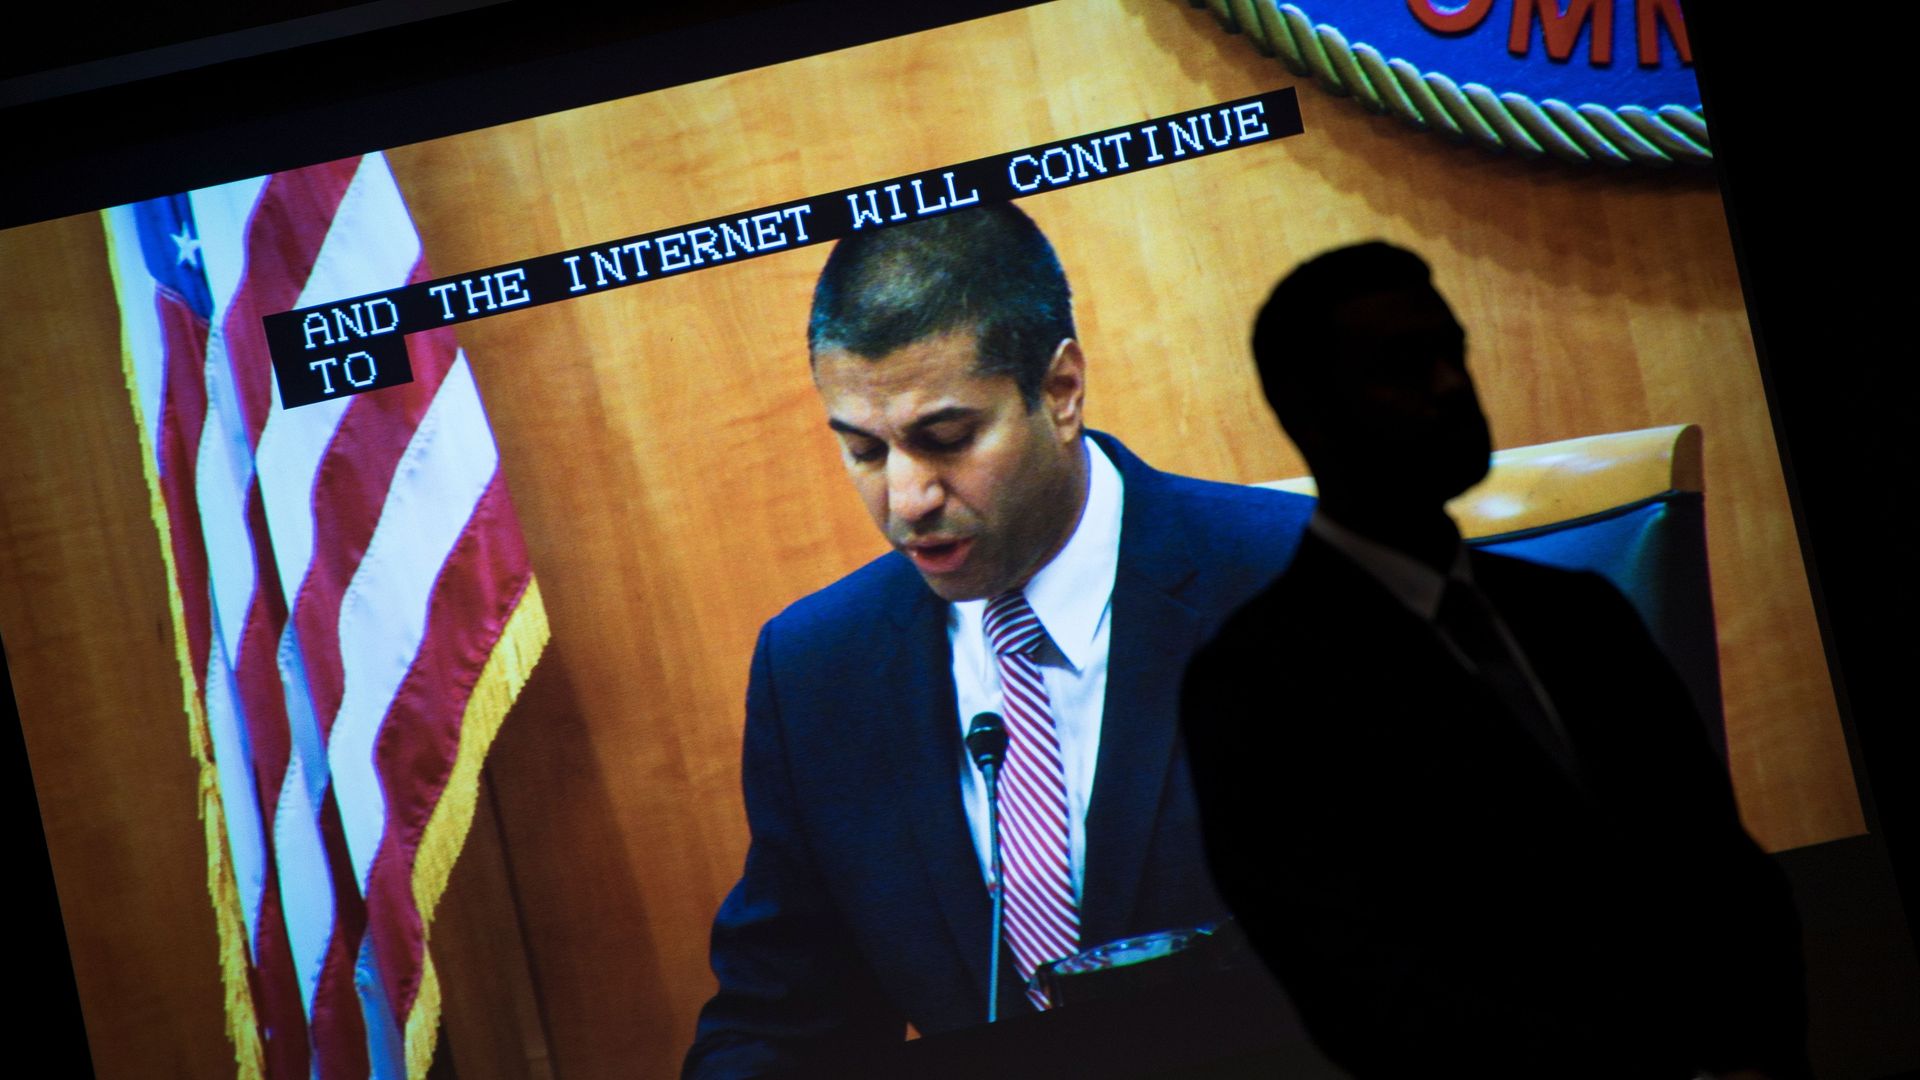 FCC Chairman Ajit Pai is shown on a screen at the agency